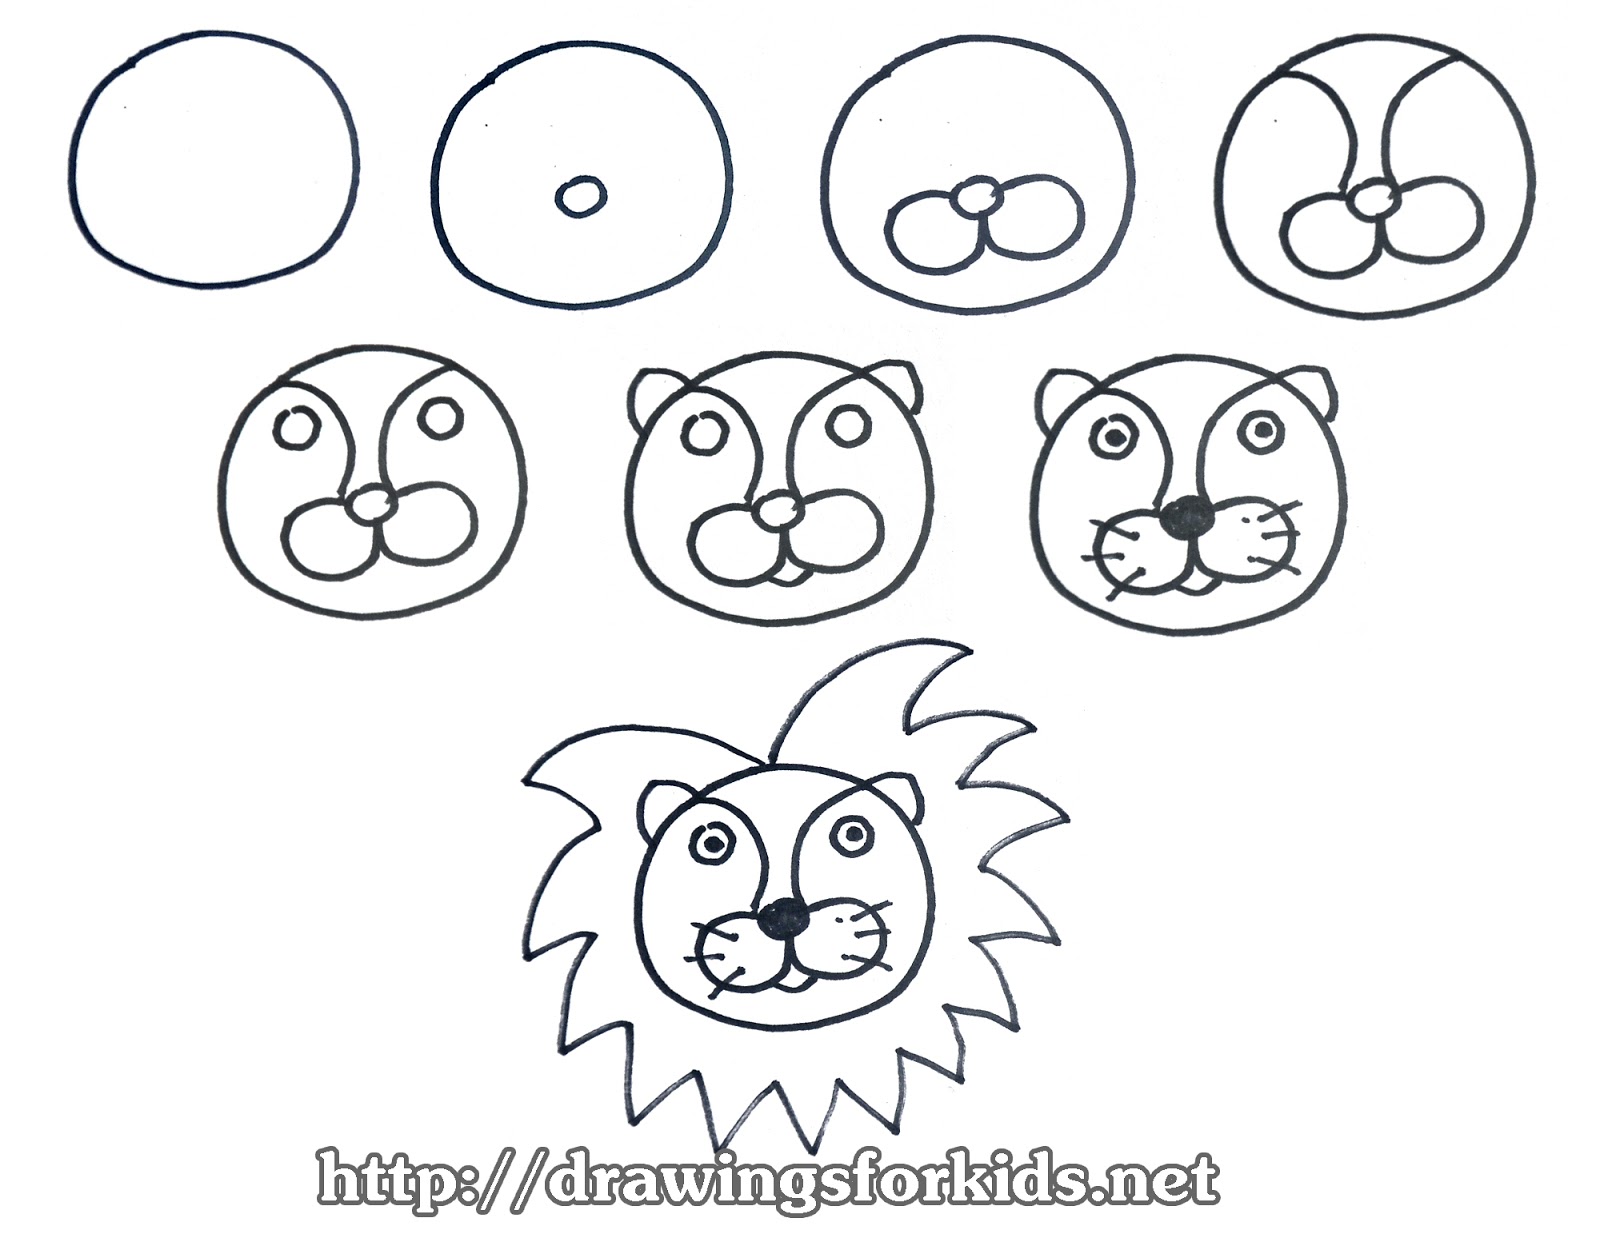 How To Draw A Lion Face Step By Step Easy For Kids / How To Draw A Lion